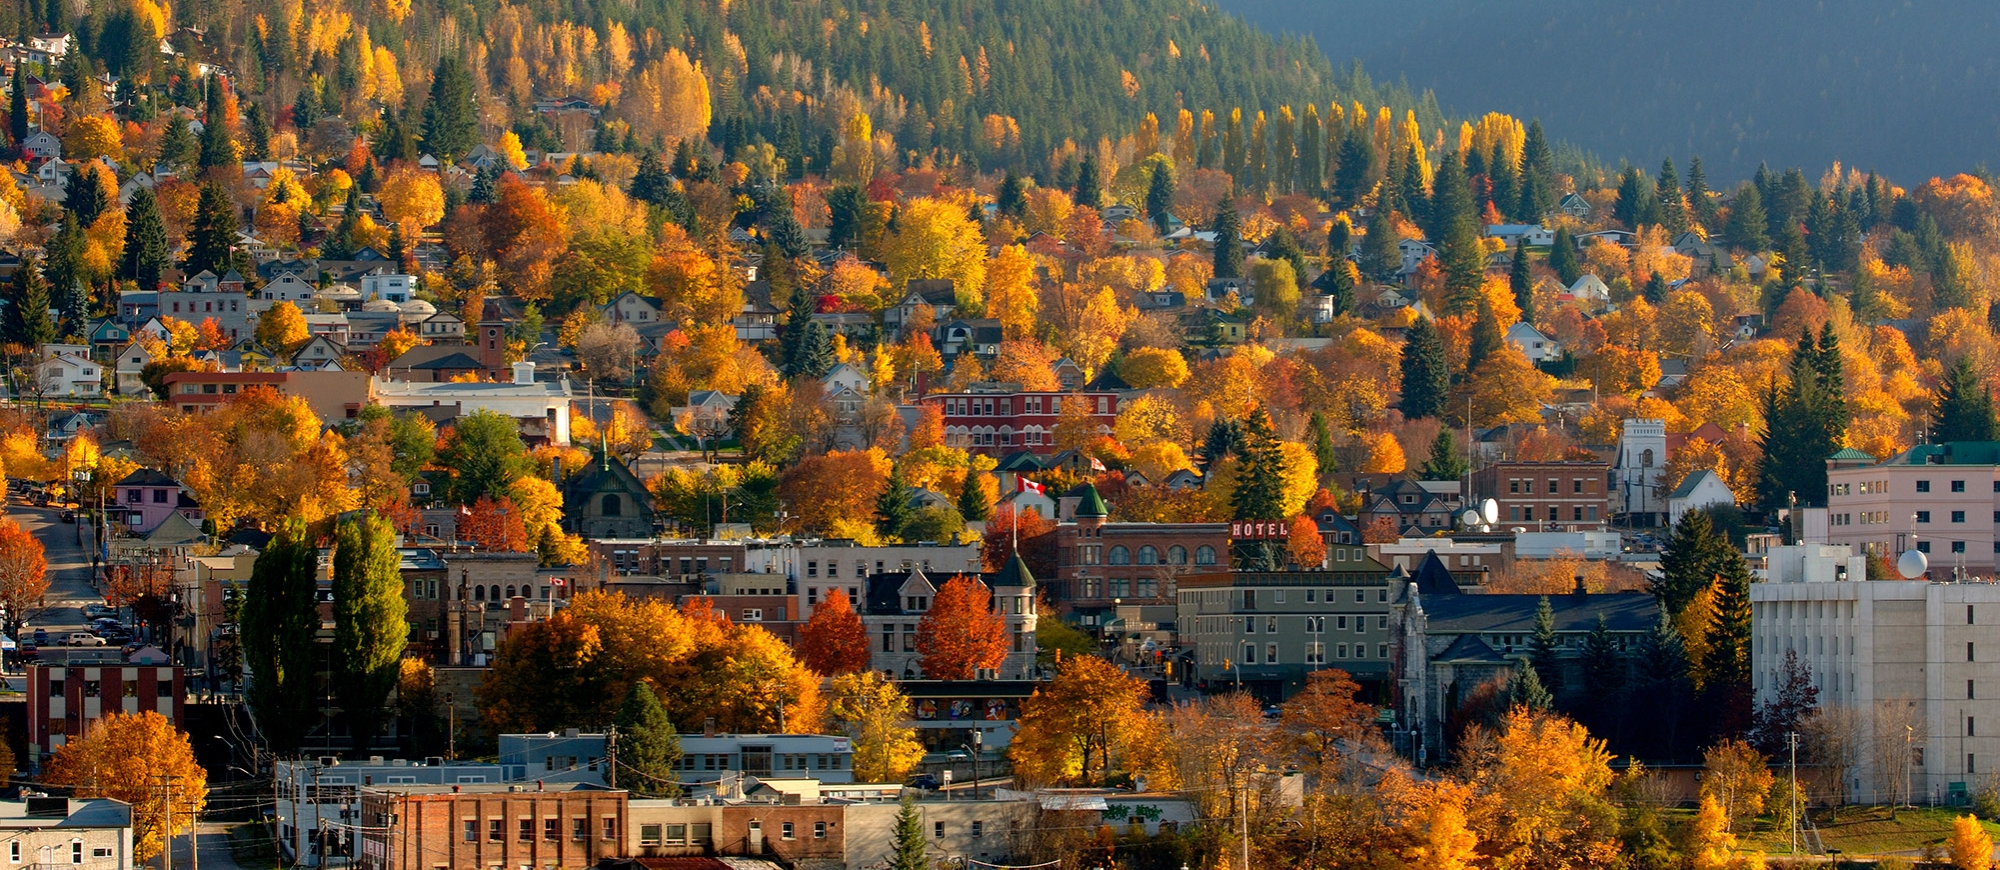 View of Nelson, BC will yellow and orange trees covering the town